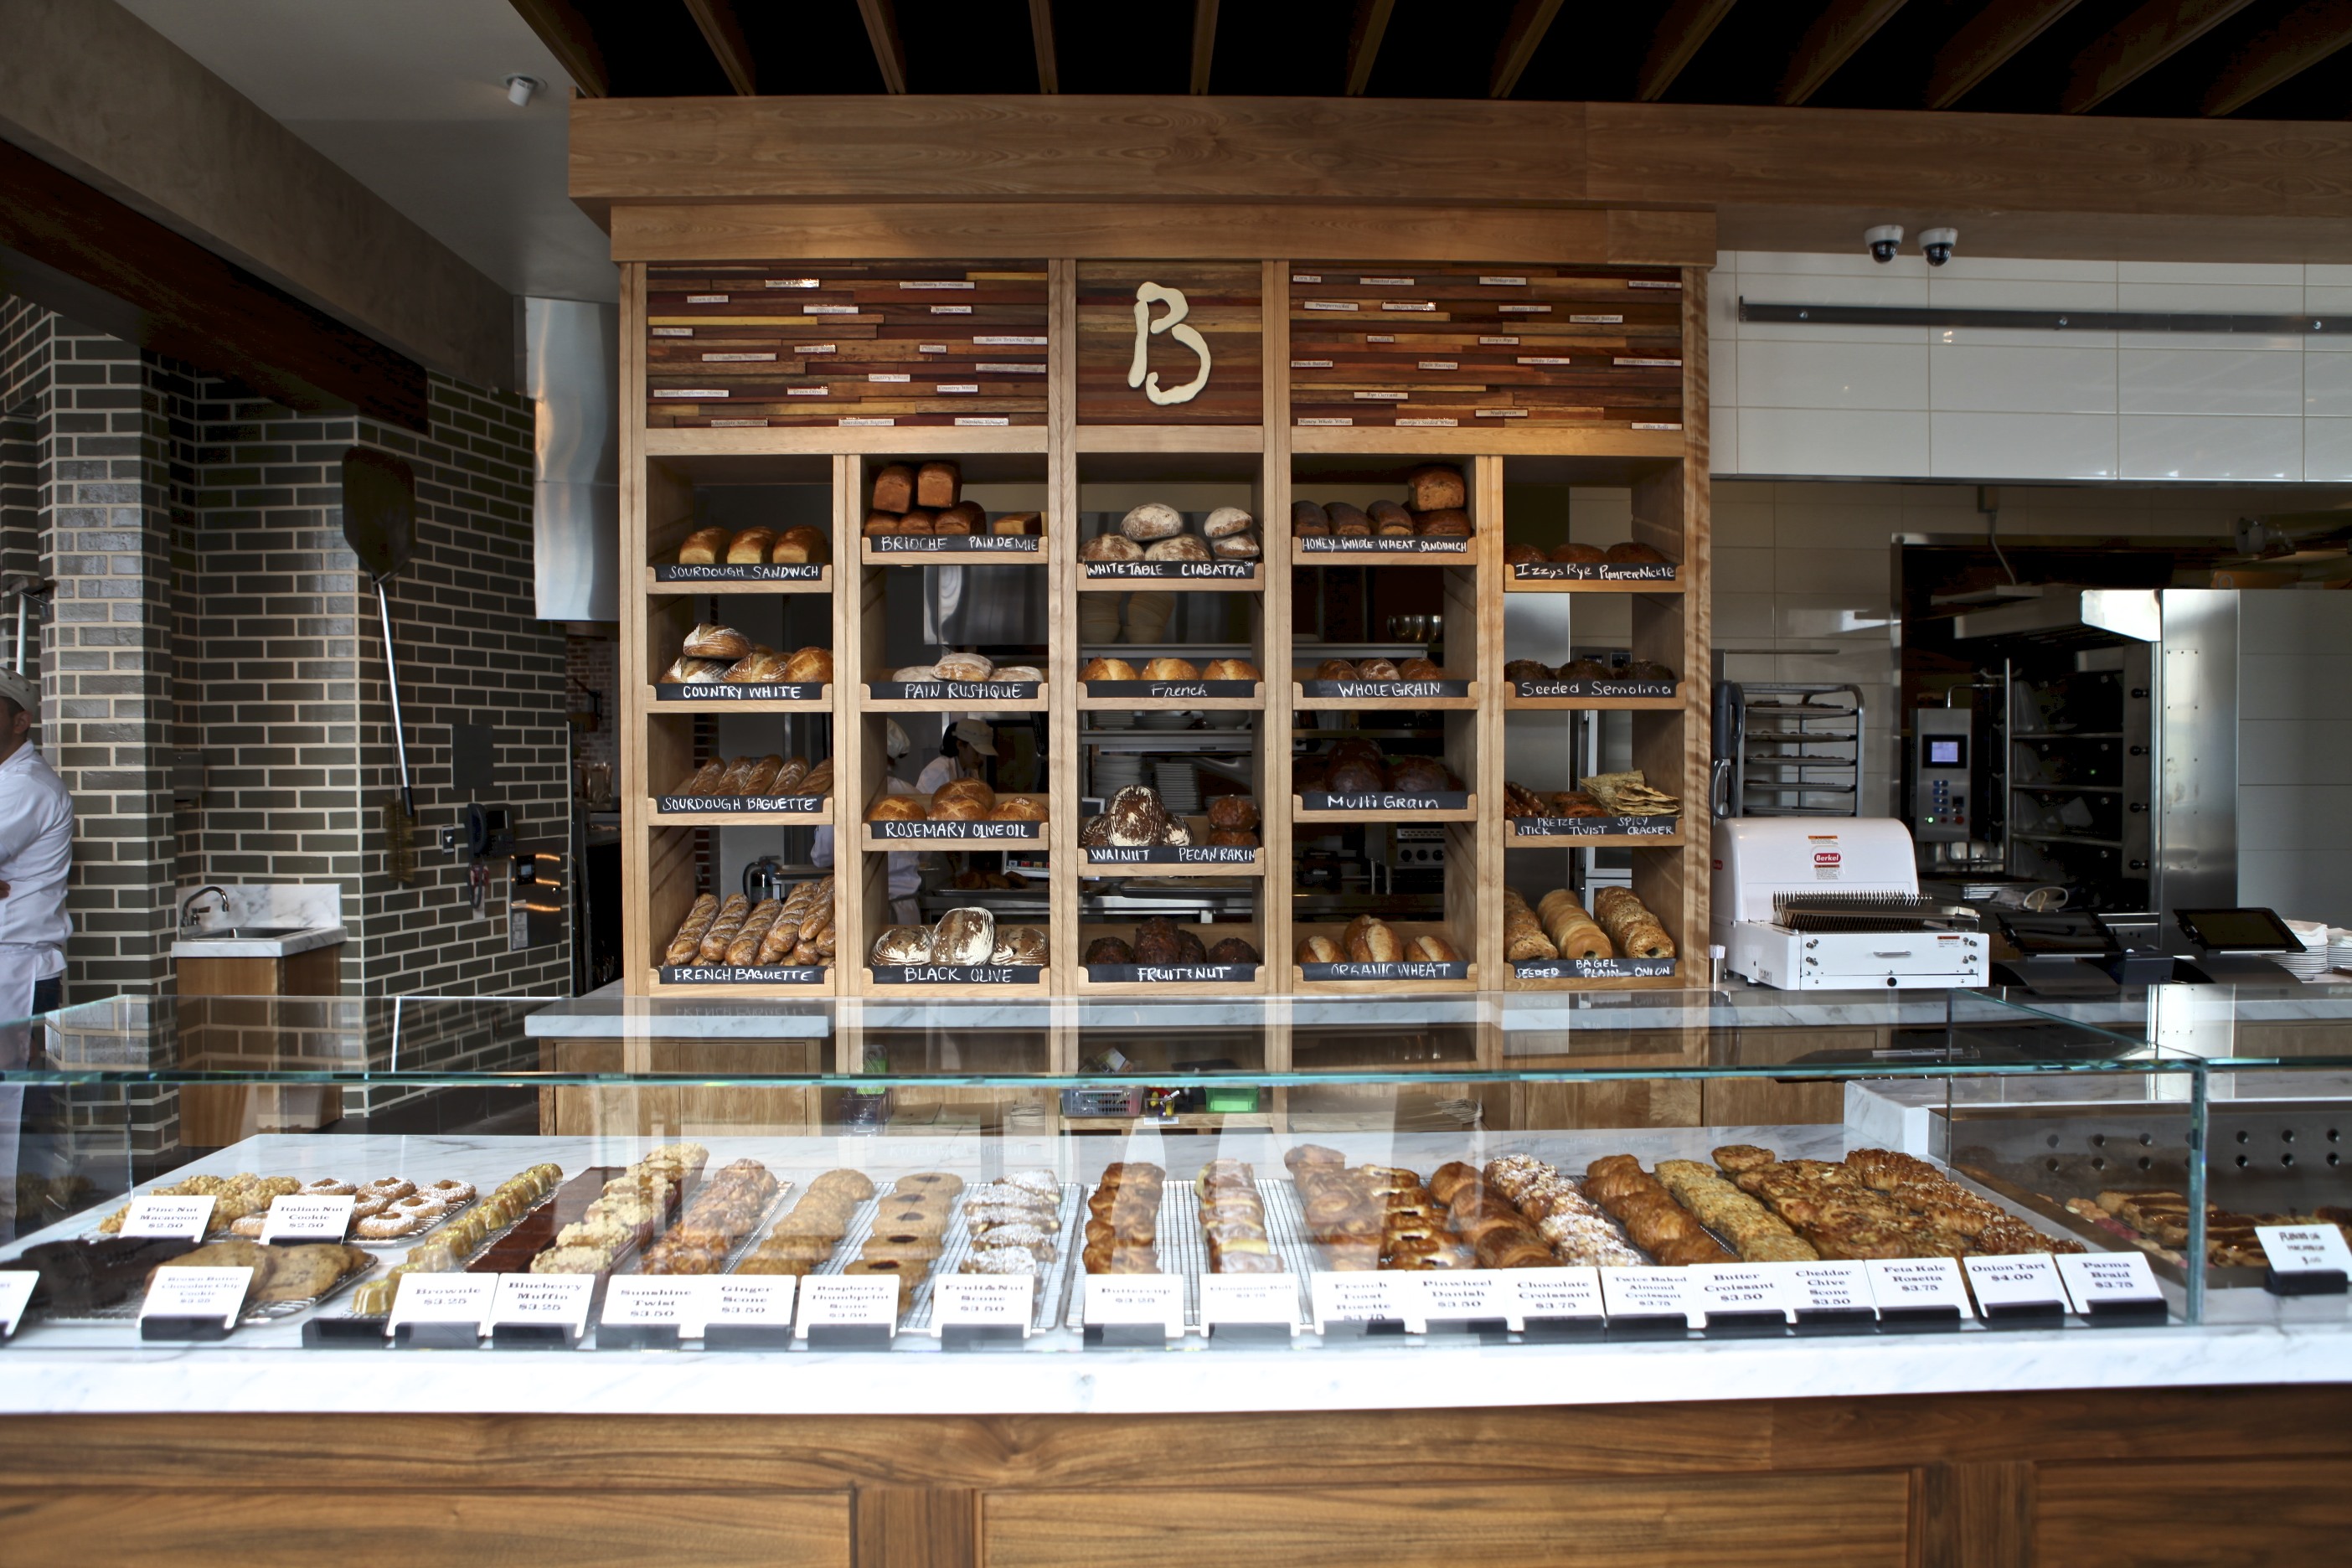 https://denver.cbslocal.com/wp-content/uploads/sites/14984641/2015/02/cafe-opening_bread-wall-and-pastry-case1.jpg